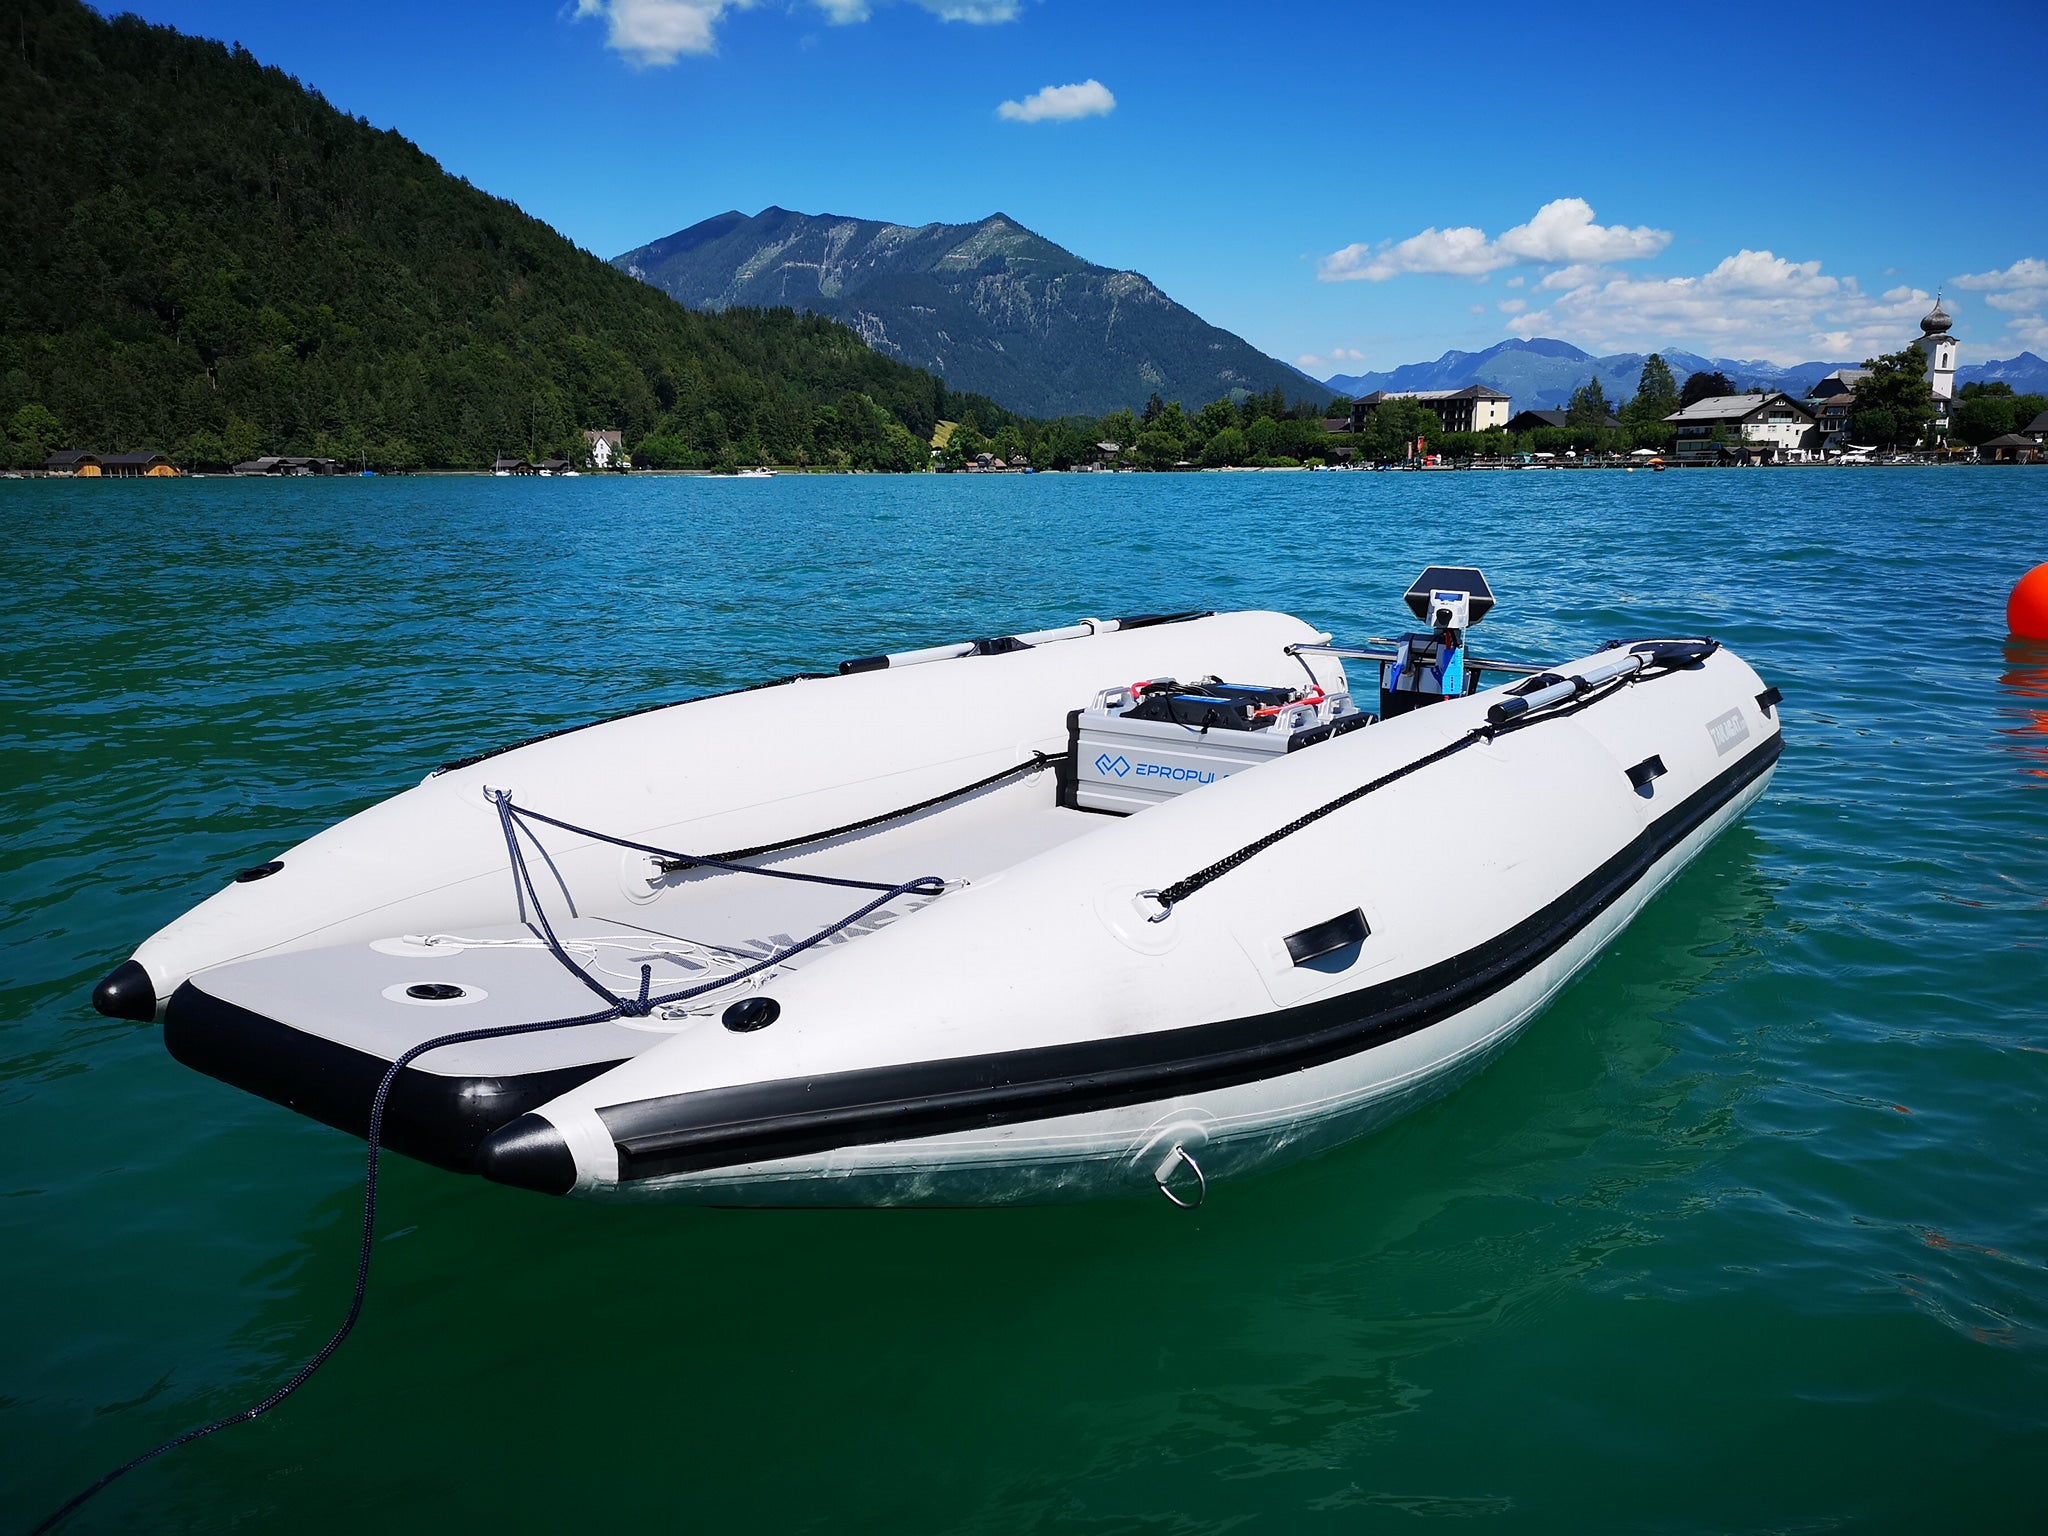 Choose the Best Flooring for Your Fishing Boat - On The Water